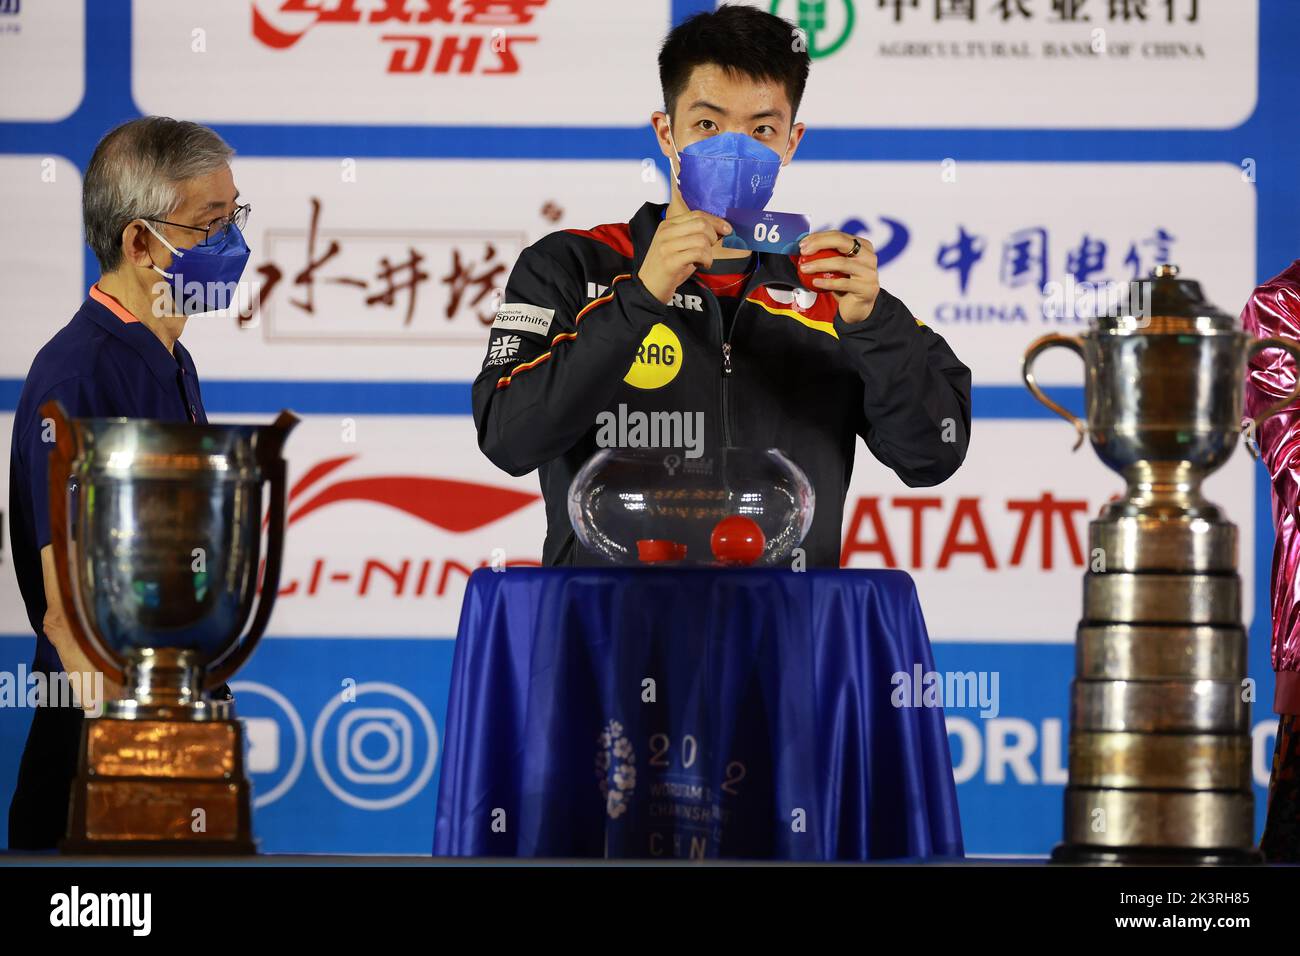 Chengdu, China's Sichuan Province. 28th Sep, 2022. Qiu Dang (R) of Germany shows a draw slip during the draw ceremony of the 2022 ITTF World Team Table Tennis Championships Finals in Chengdu, southwest China's Sichuan Province, Sept. 28, 2022. Credit: Liu Xu/Xinhua/Alamy Live News Stock Photo